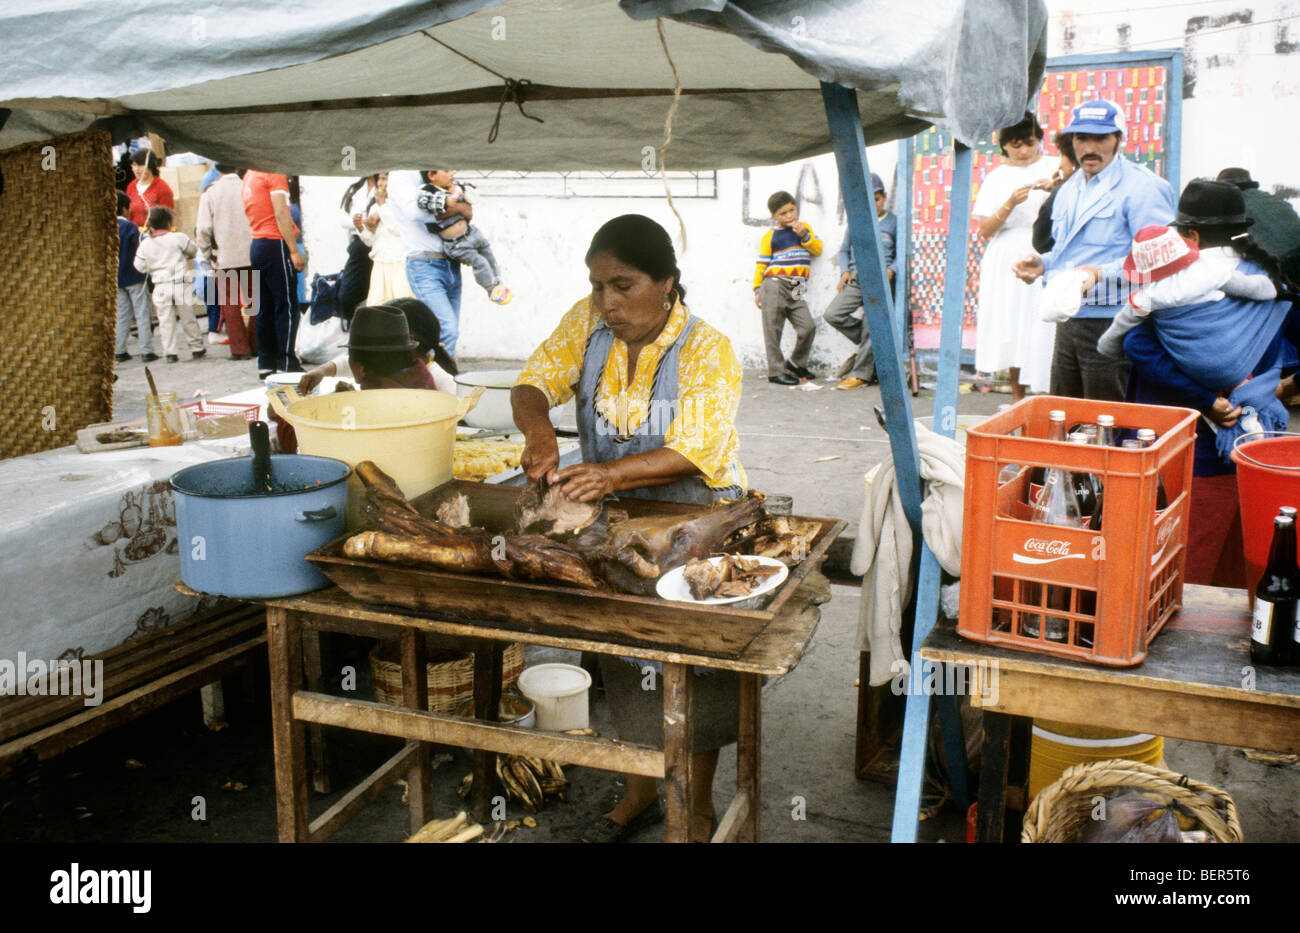 Woman carving up portion of a whole roasted pig. Ecuador market.. Stock Photo